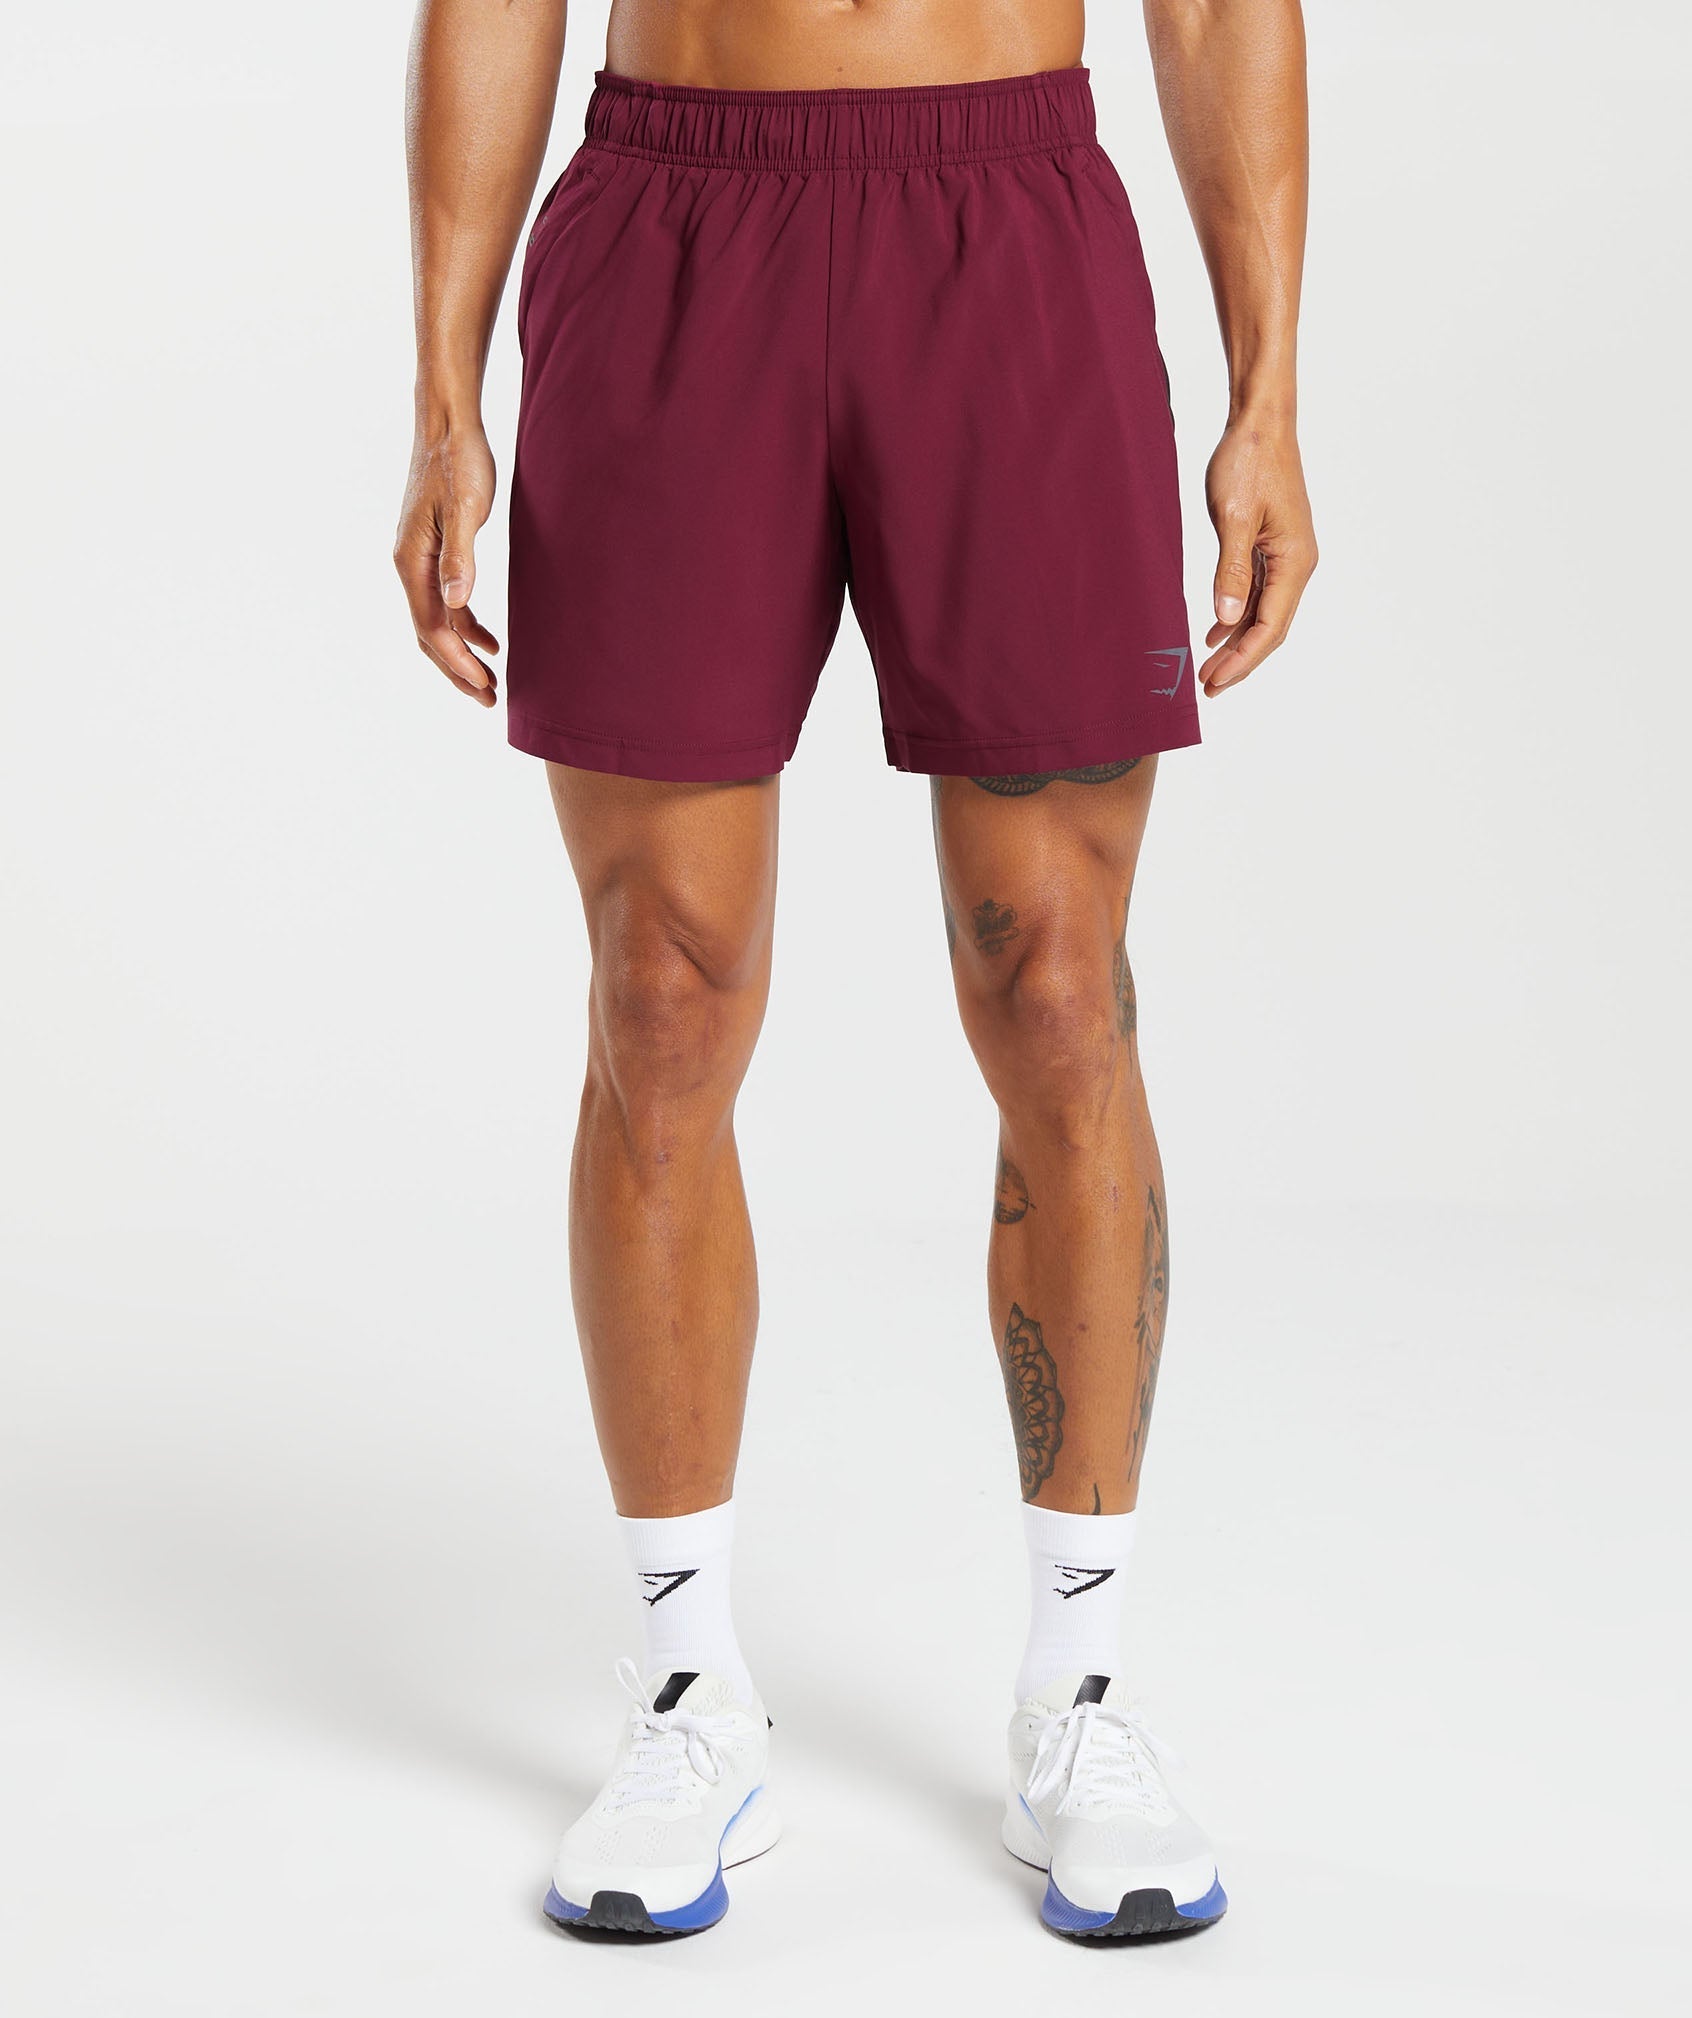 Sport  7" Shorts in Plum Pink/Black - view 1